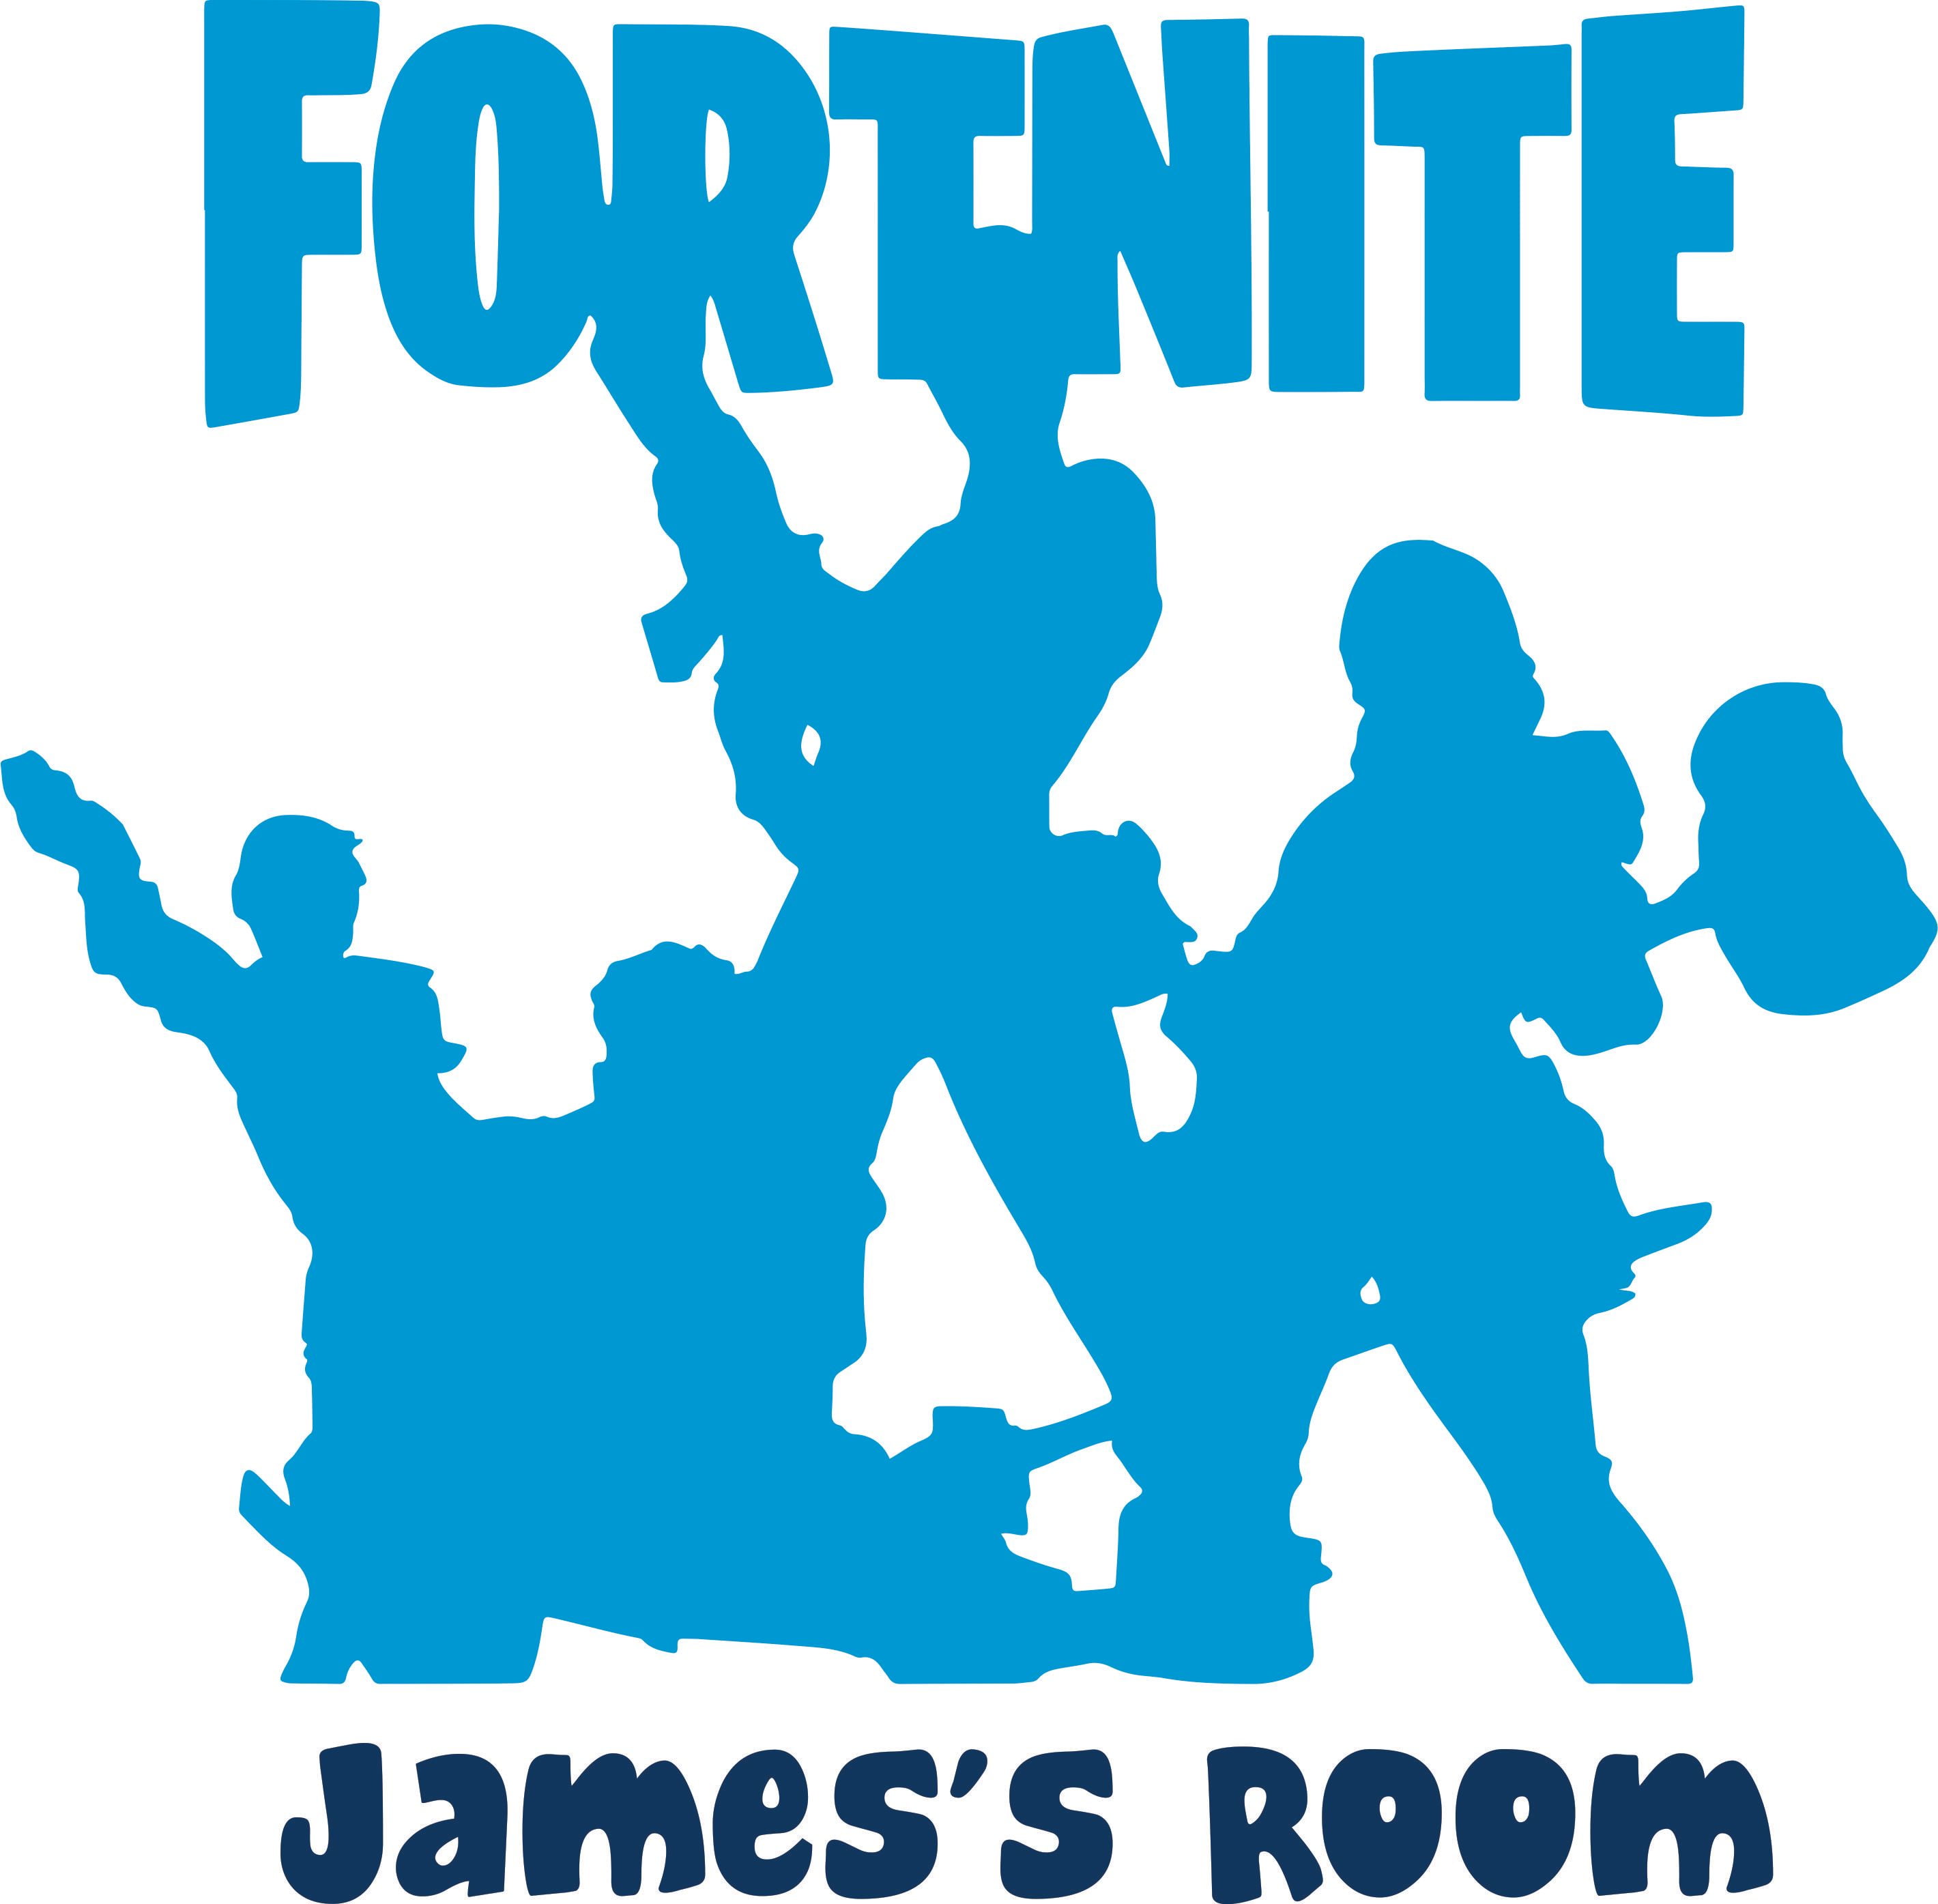 Without Name Lettering Fortnite Decal PS4 Xbox Wall Art Sticker 